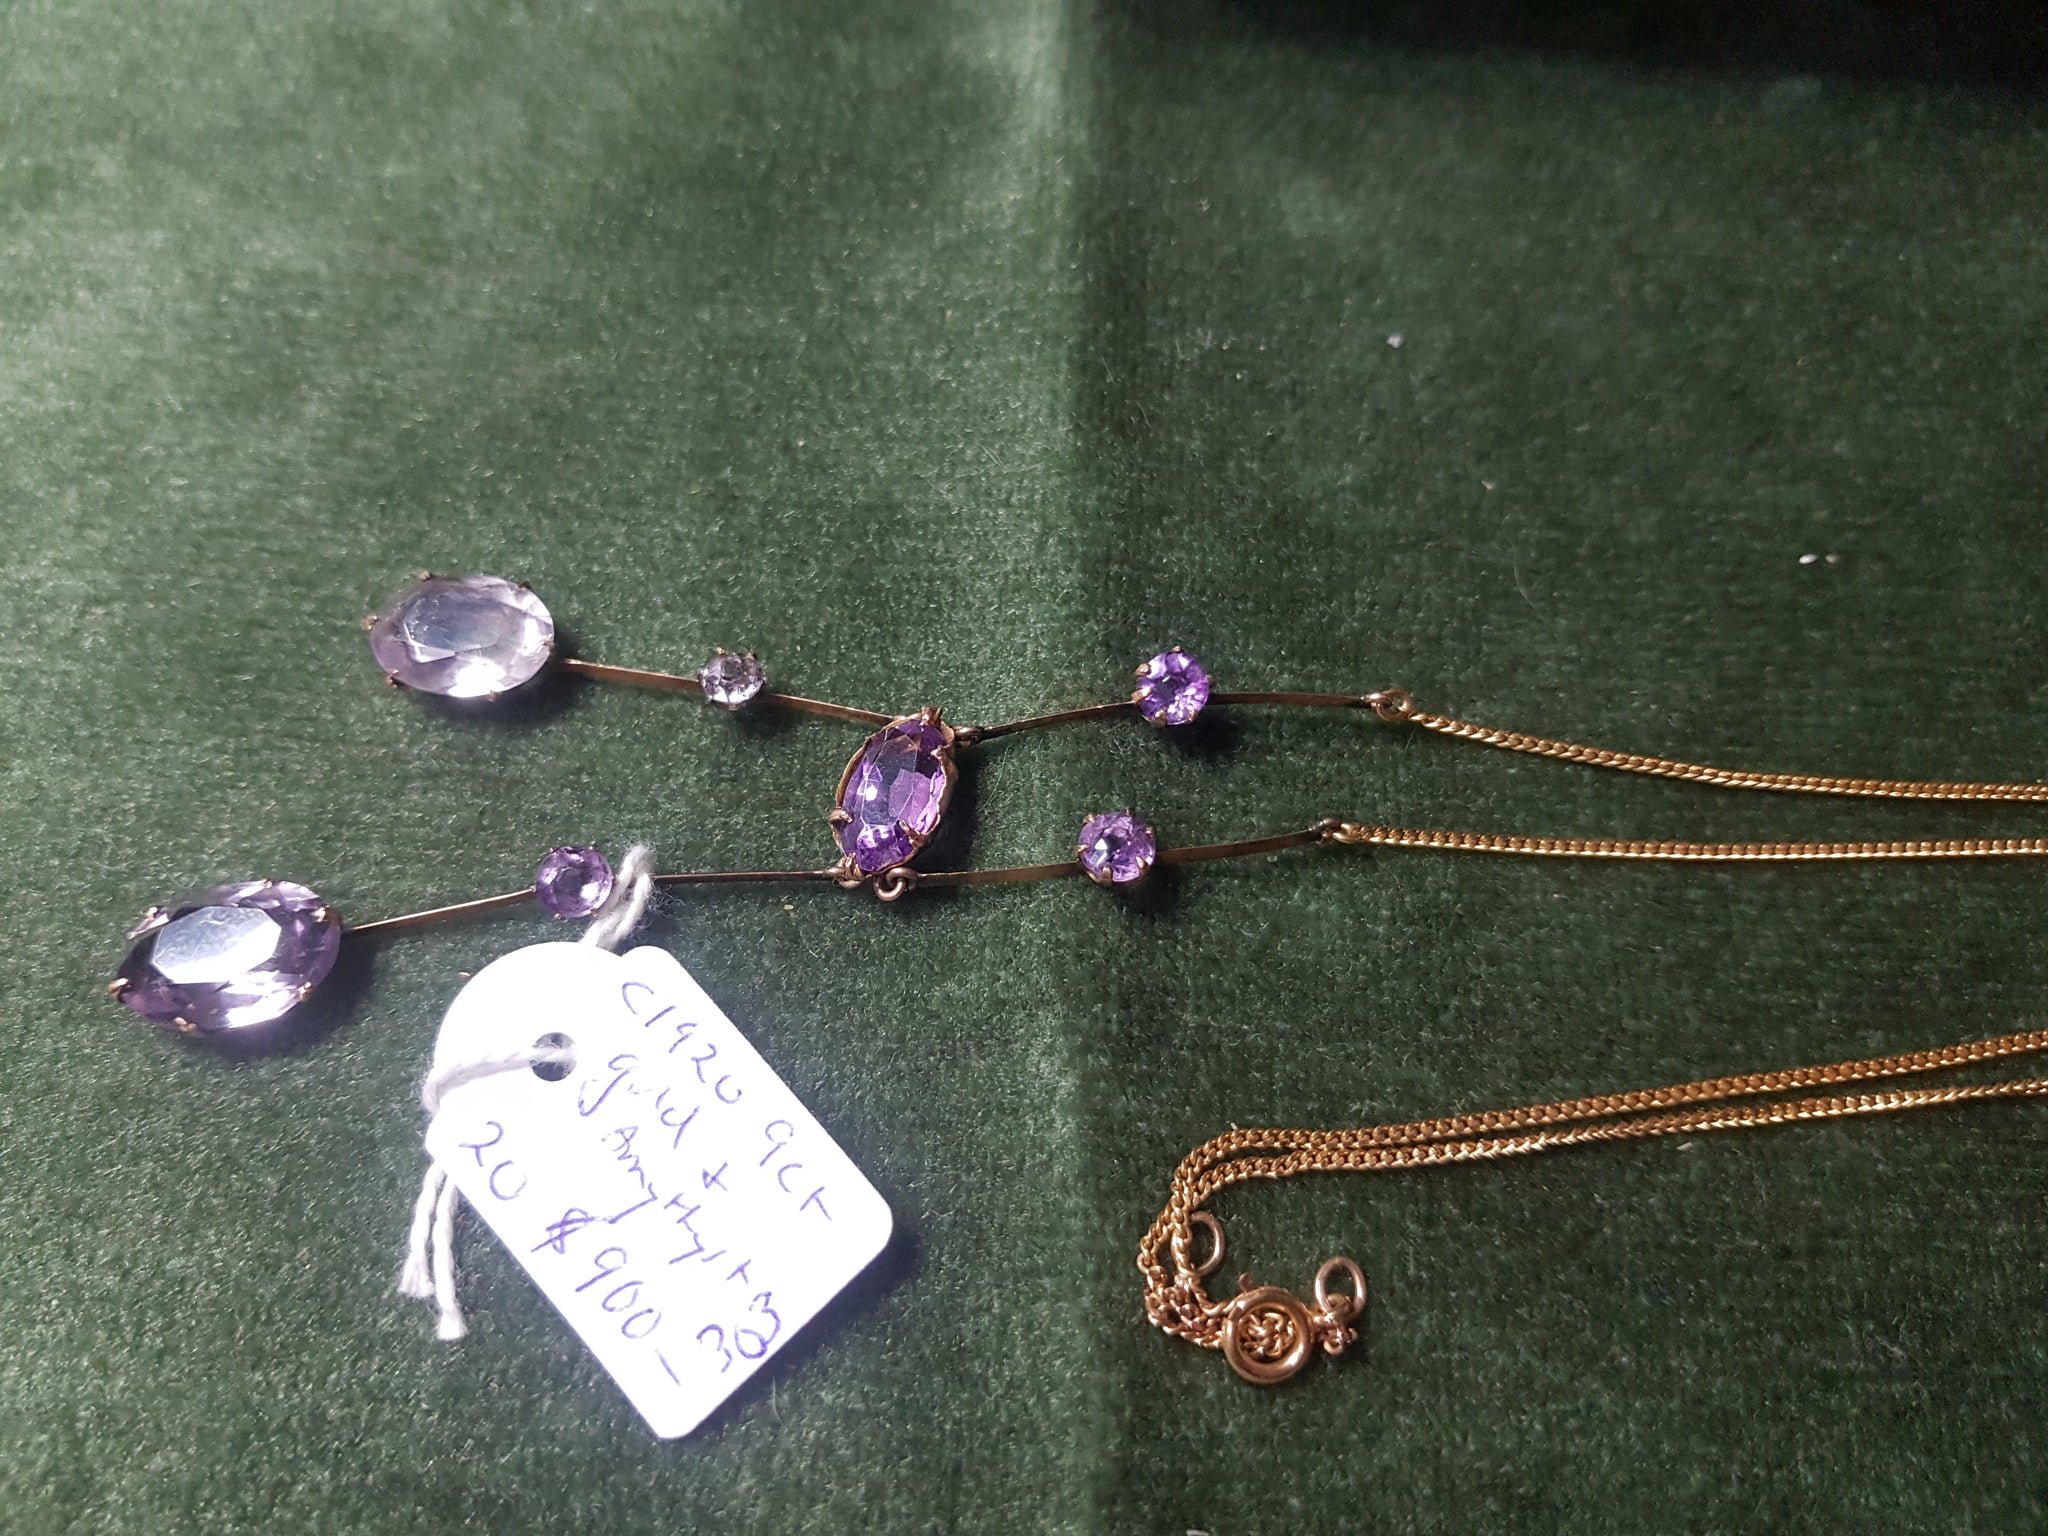 c1920 9ct Gold and Amethyst necklace #303